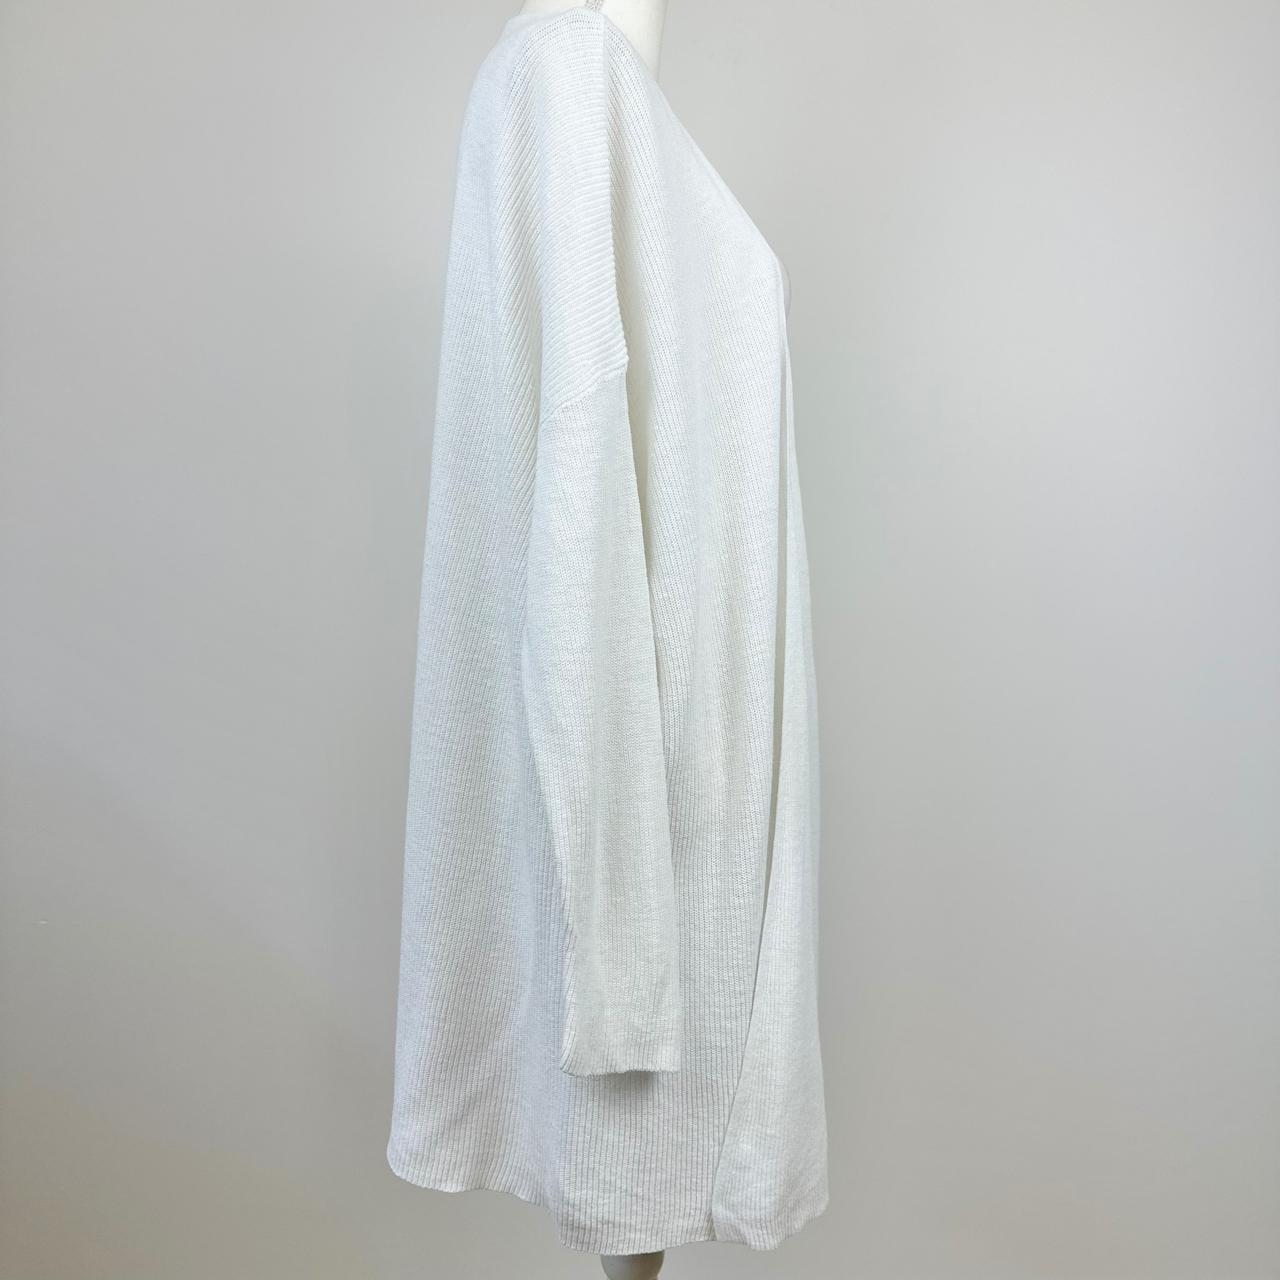 EILEEN FISHER Cotton & Linen Ribbed Towels